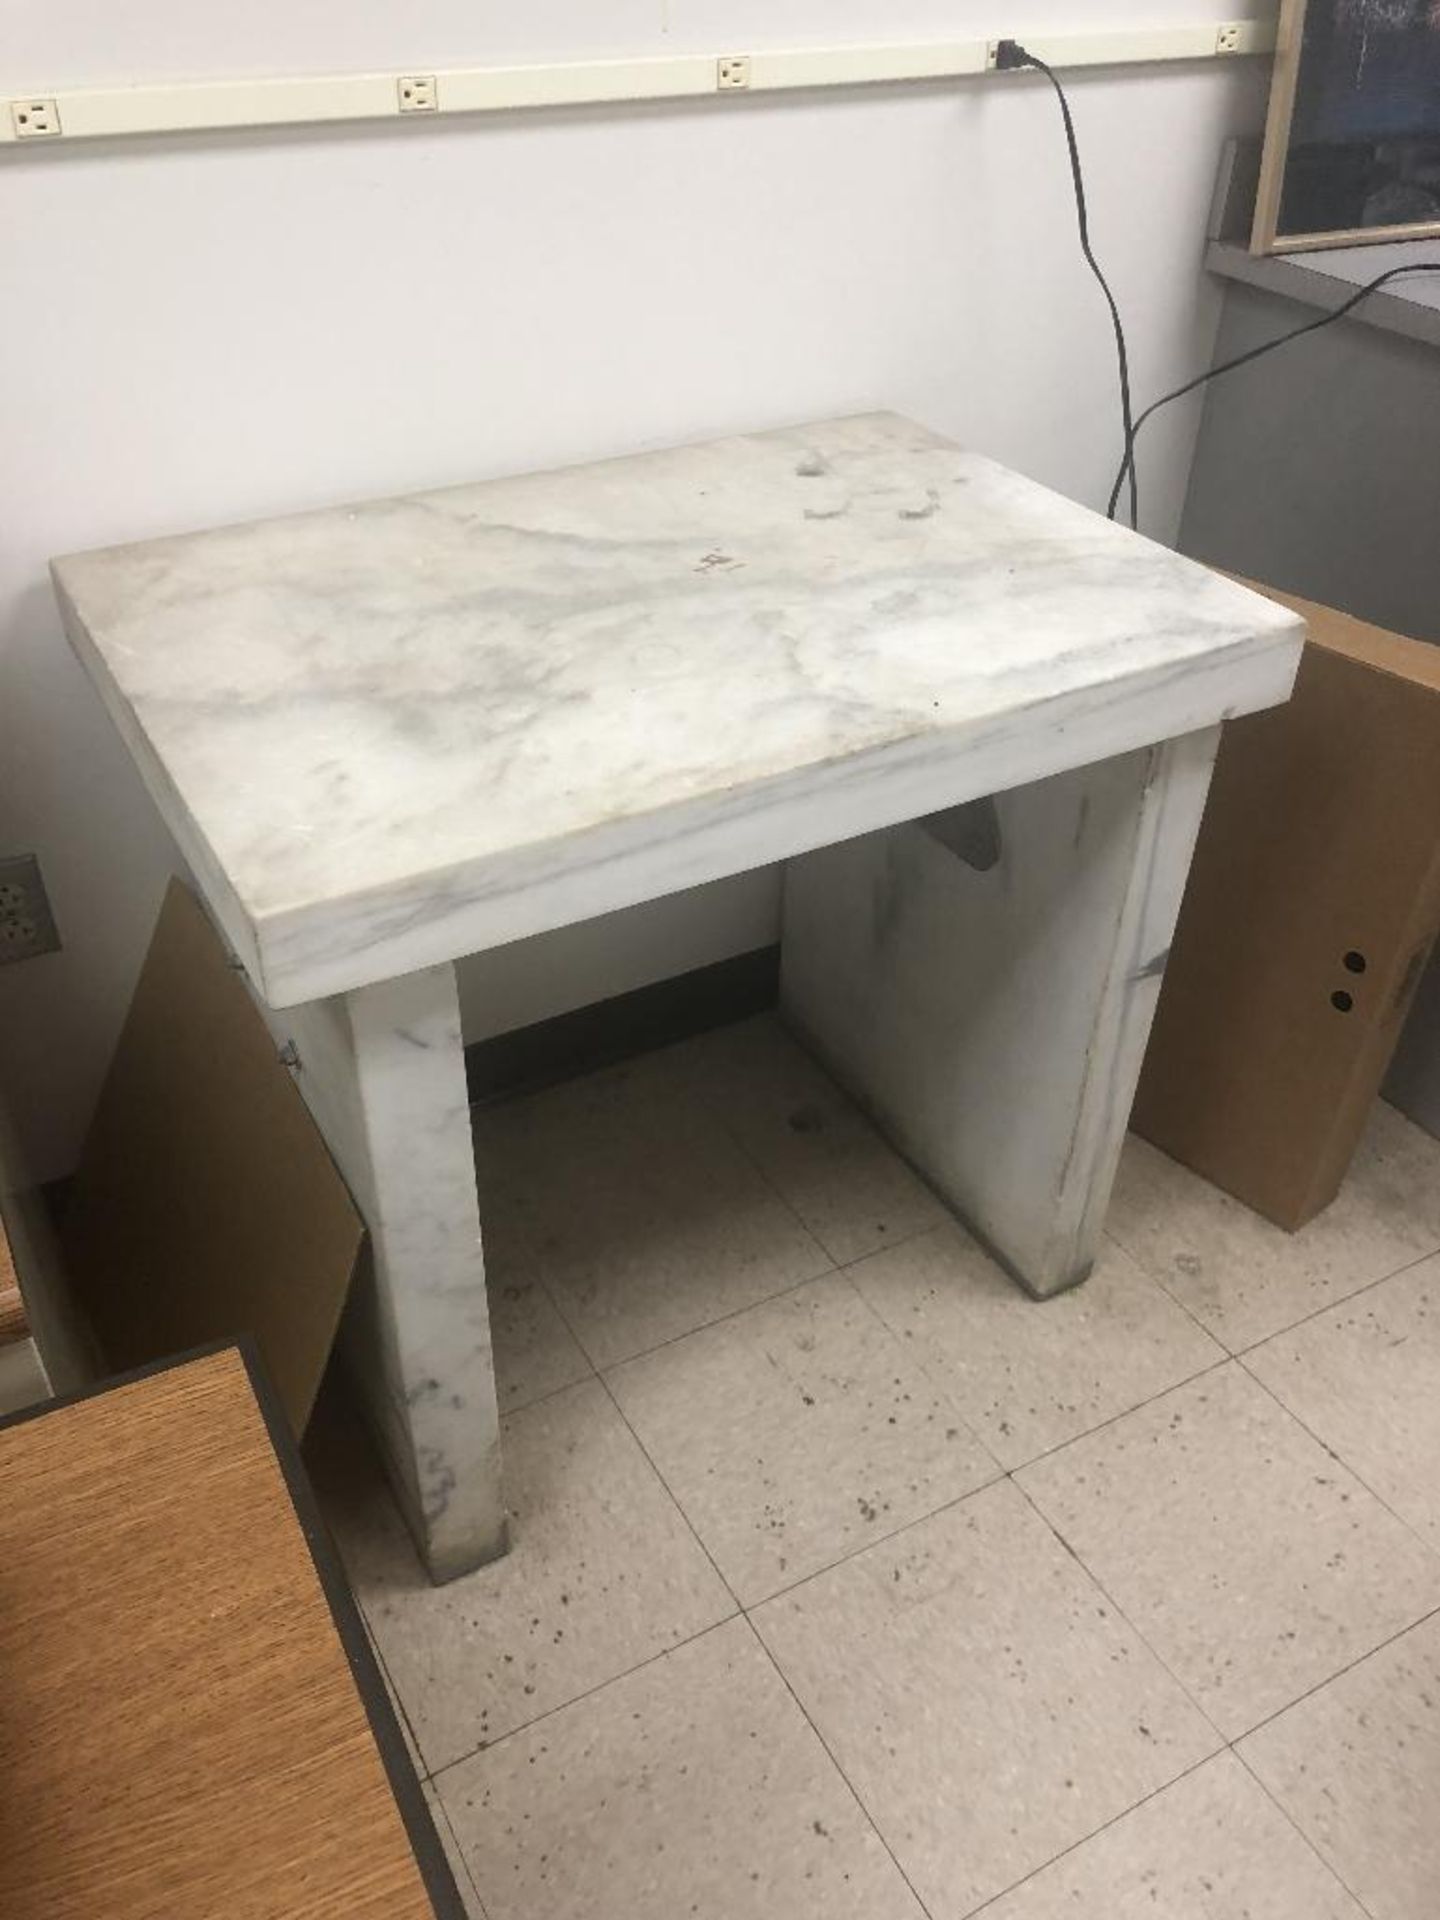 1 Marble Lab Table Dimensions 24" x 35" x 32" - Image 3 of 4